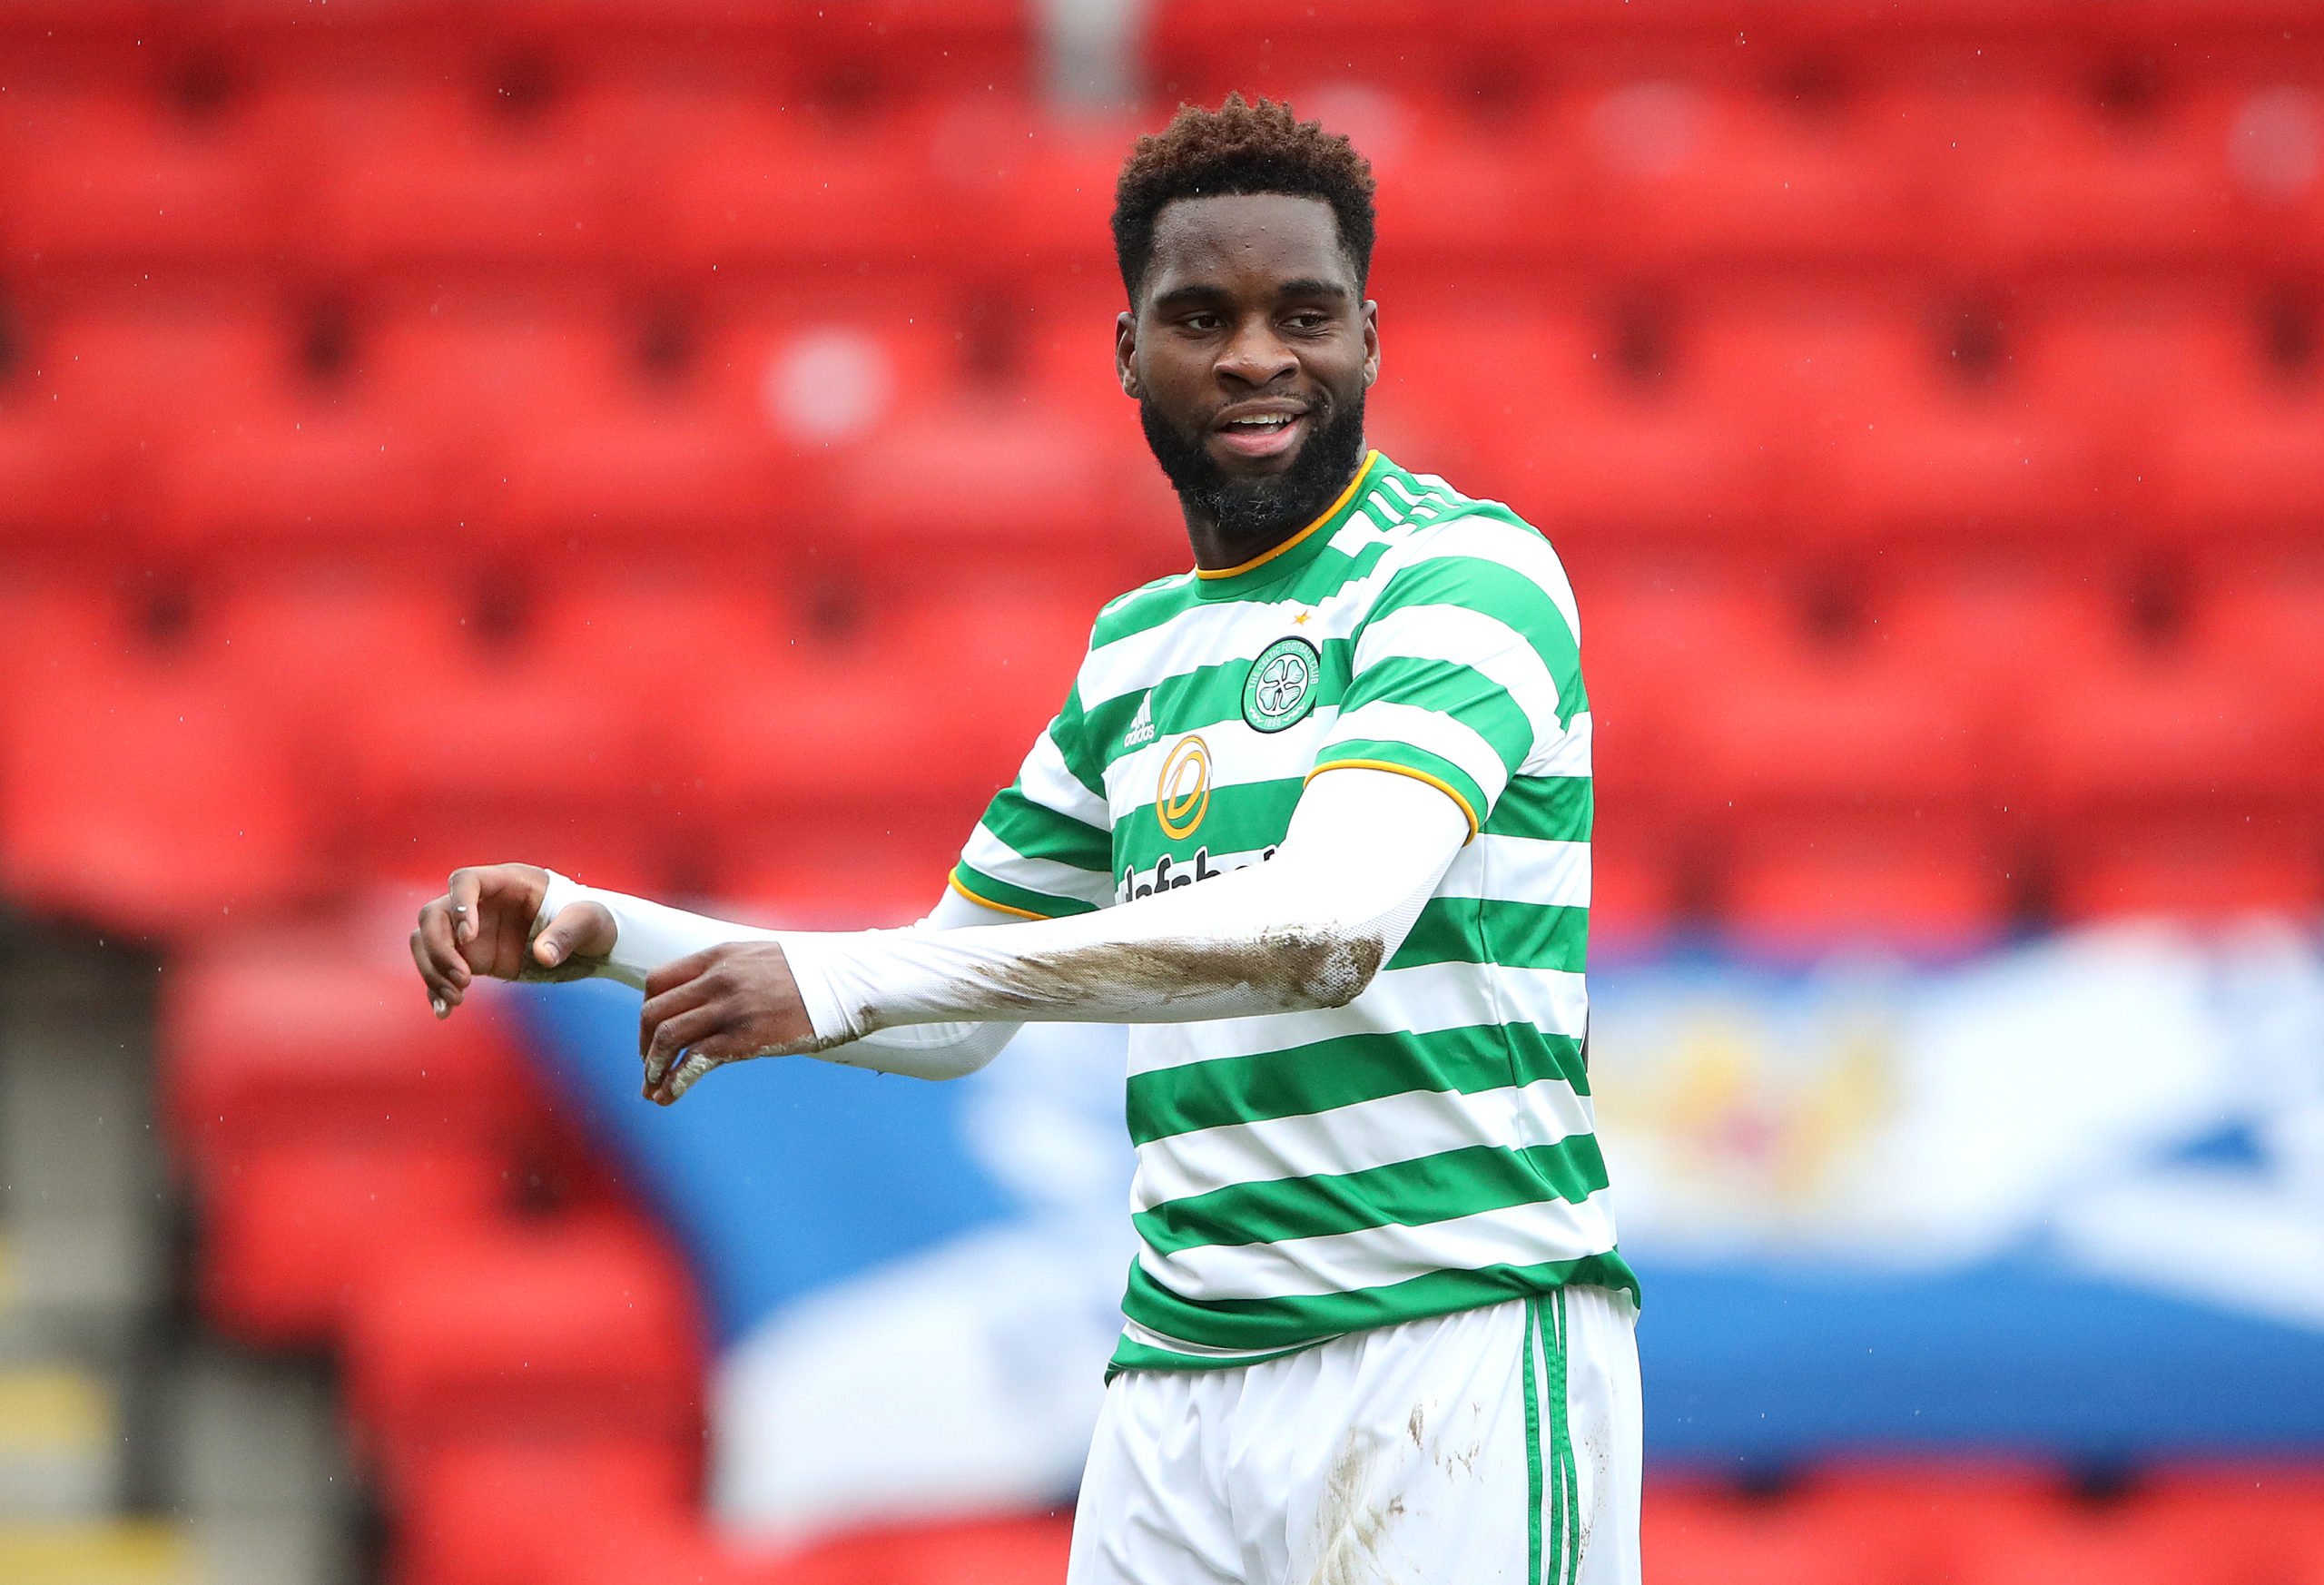 "Standard", "My striker"; Celtic supporters react as Odsonne Edouard wins Player of the Month